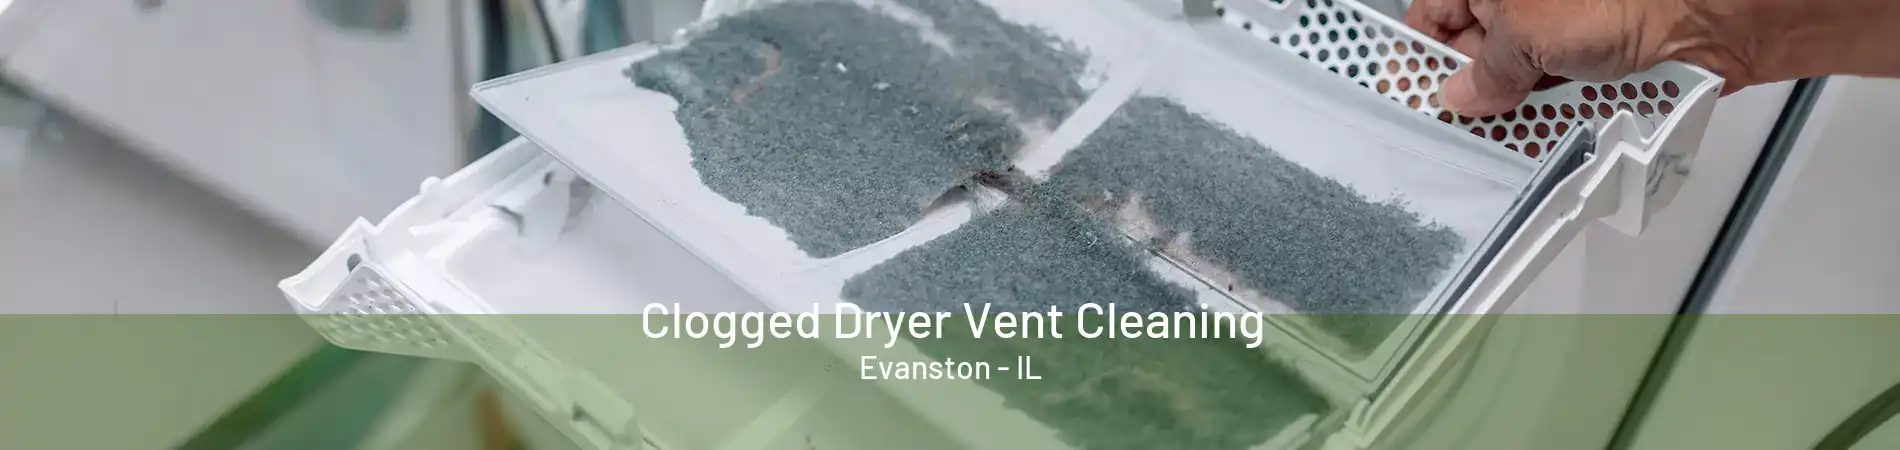 Clogged Dryer Vent Cleaning Evanston - IL